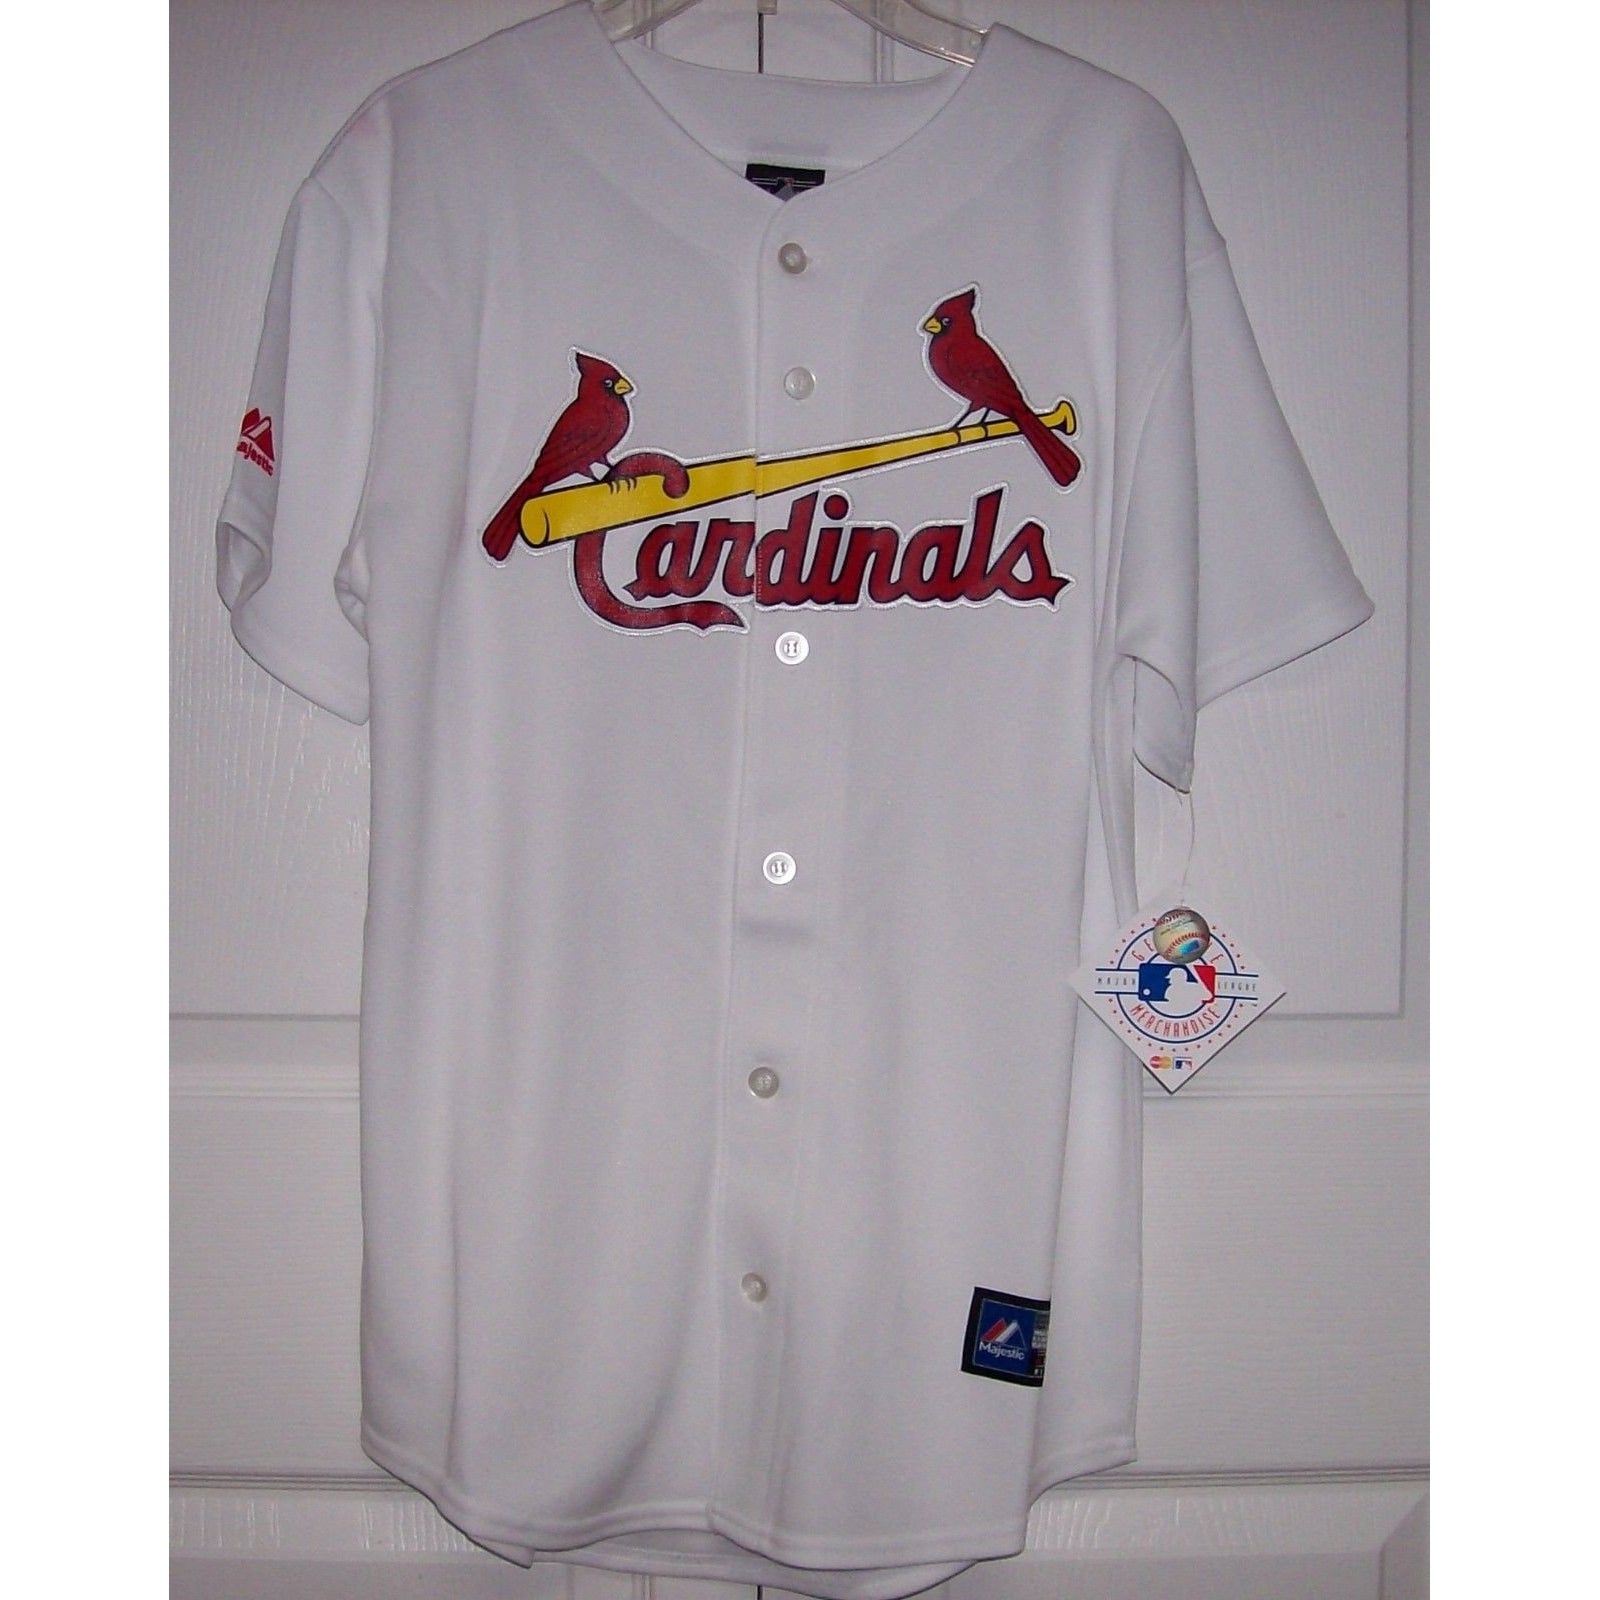 SWEET St. Louis Cardinals Youth Md Stitches Multi Color Jersey